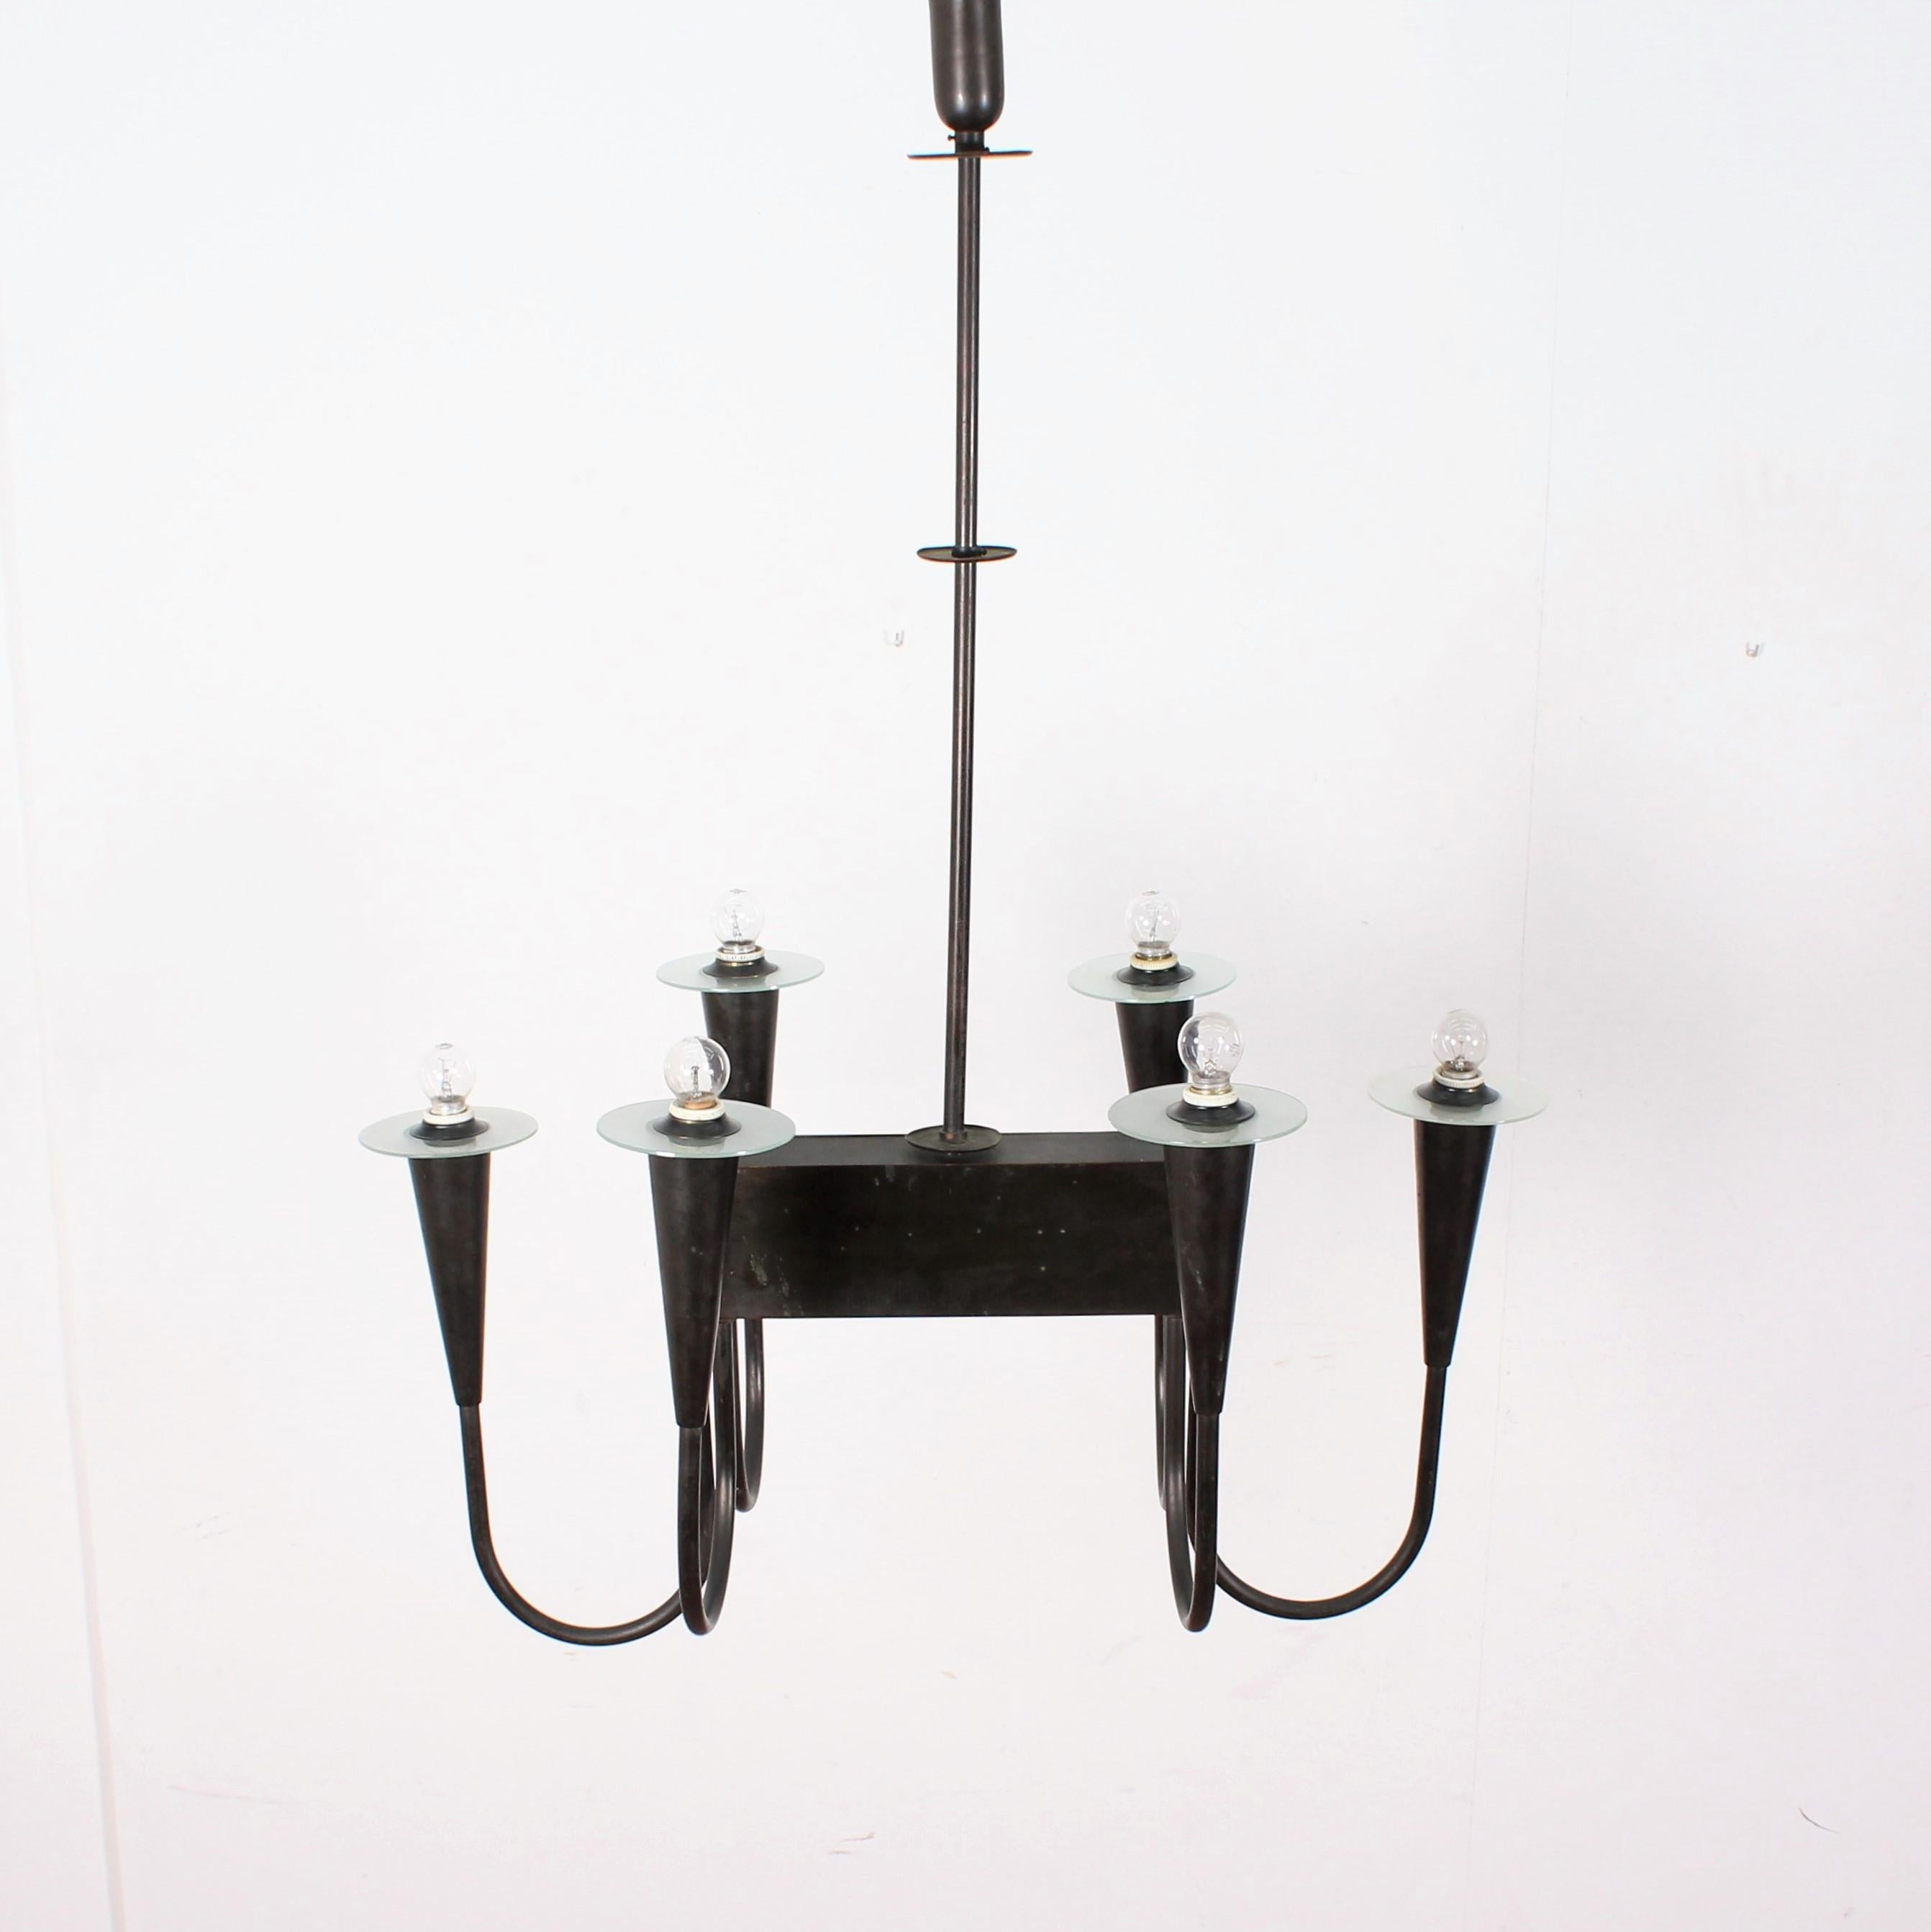 Elegant and rationalist large chandelier in black lacquered brass with glass discs, attributed to Tomaso Buzzi, 1940s, Italy.
There are some marks on the metal surface and on the edges of some glass discs. These defects are visible in the